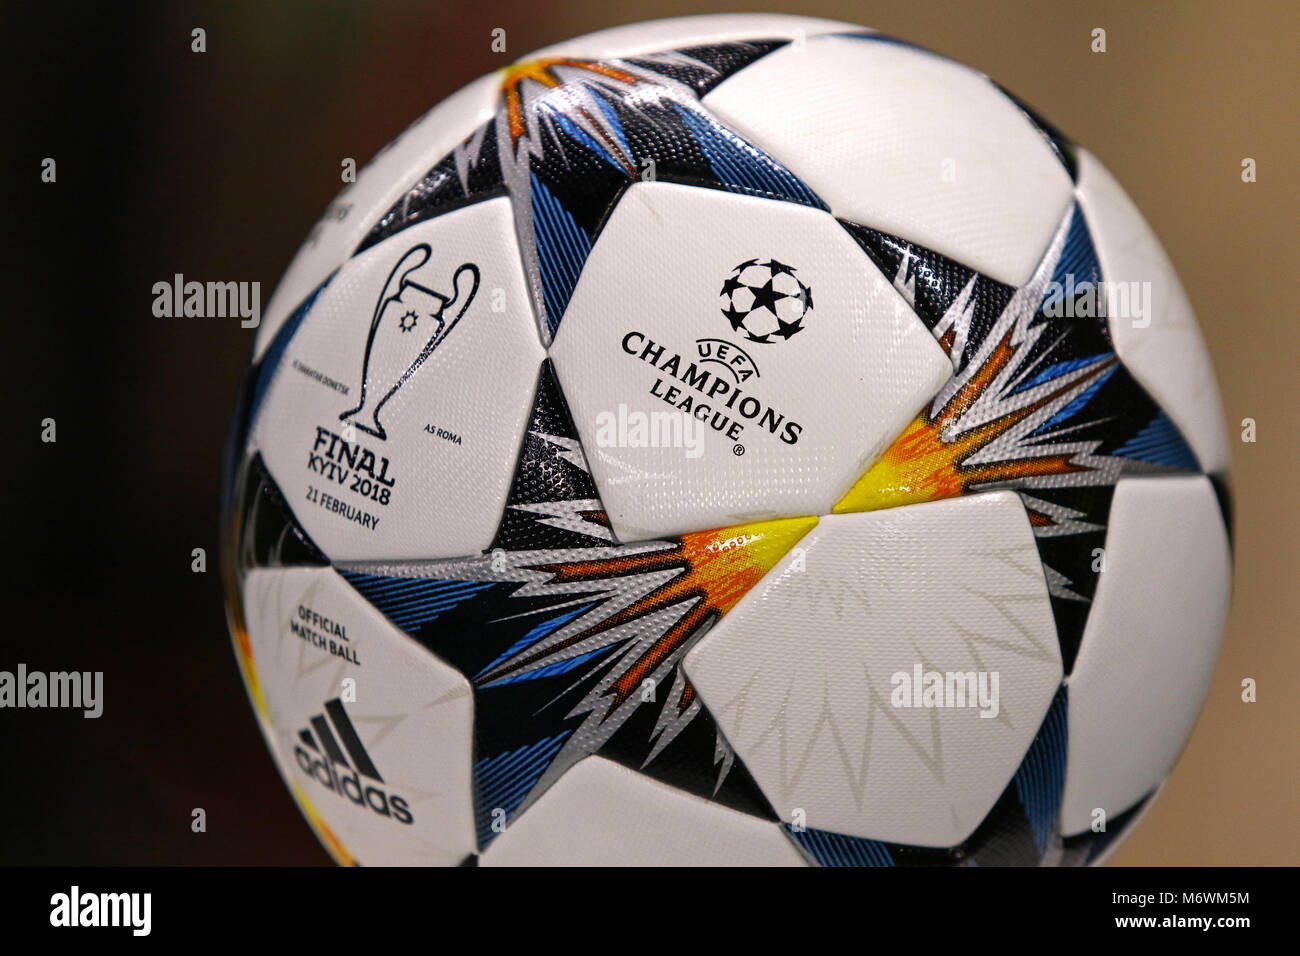 KHARKIV, UKRAINE - FEBRUARY 21, 2018: Close-up official match ball of UEFA  Champions League Final 2017/18 before Champions League Round of 16 game Sha  Stock Photo - Alamy